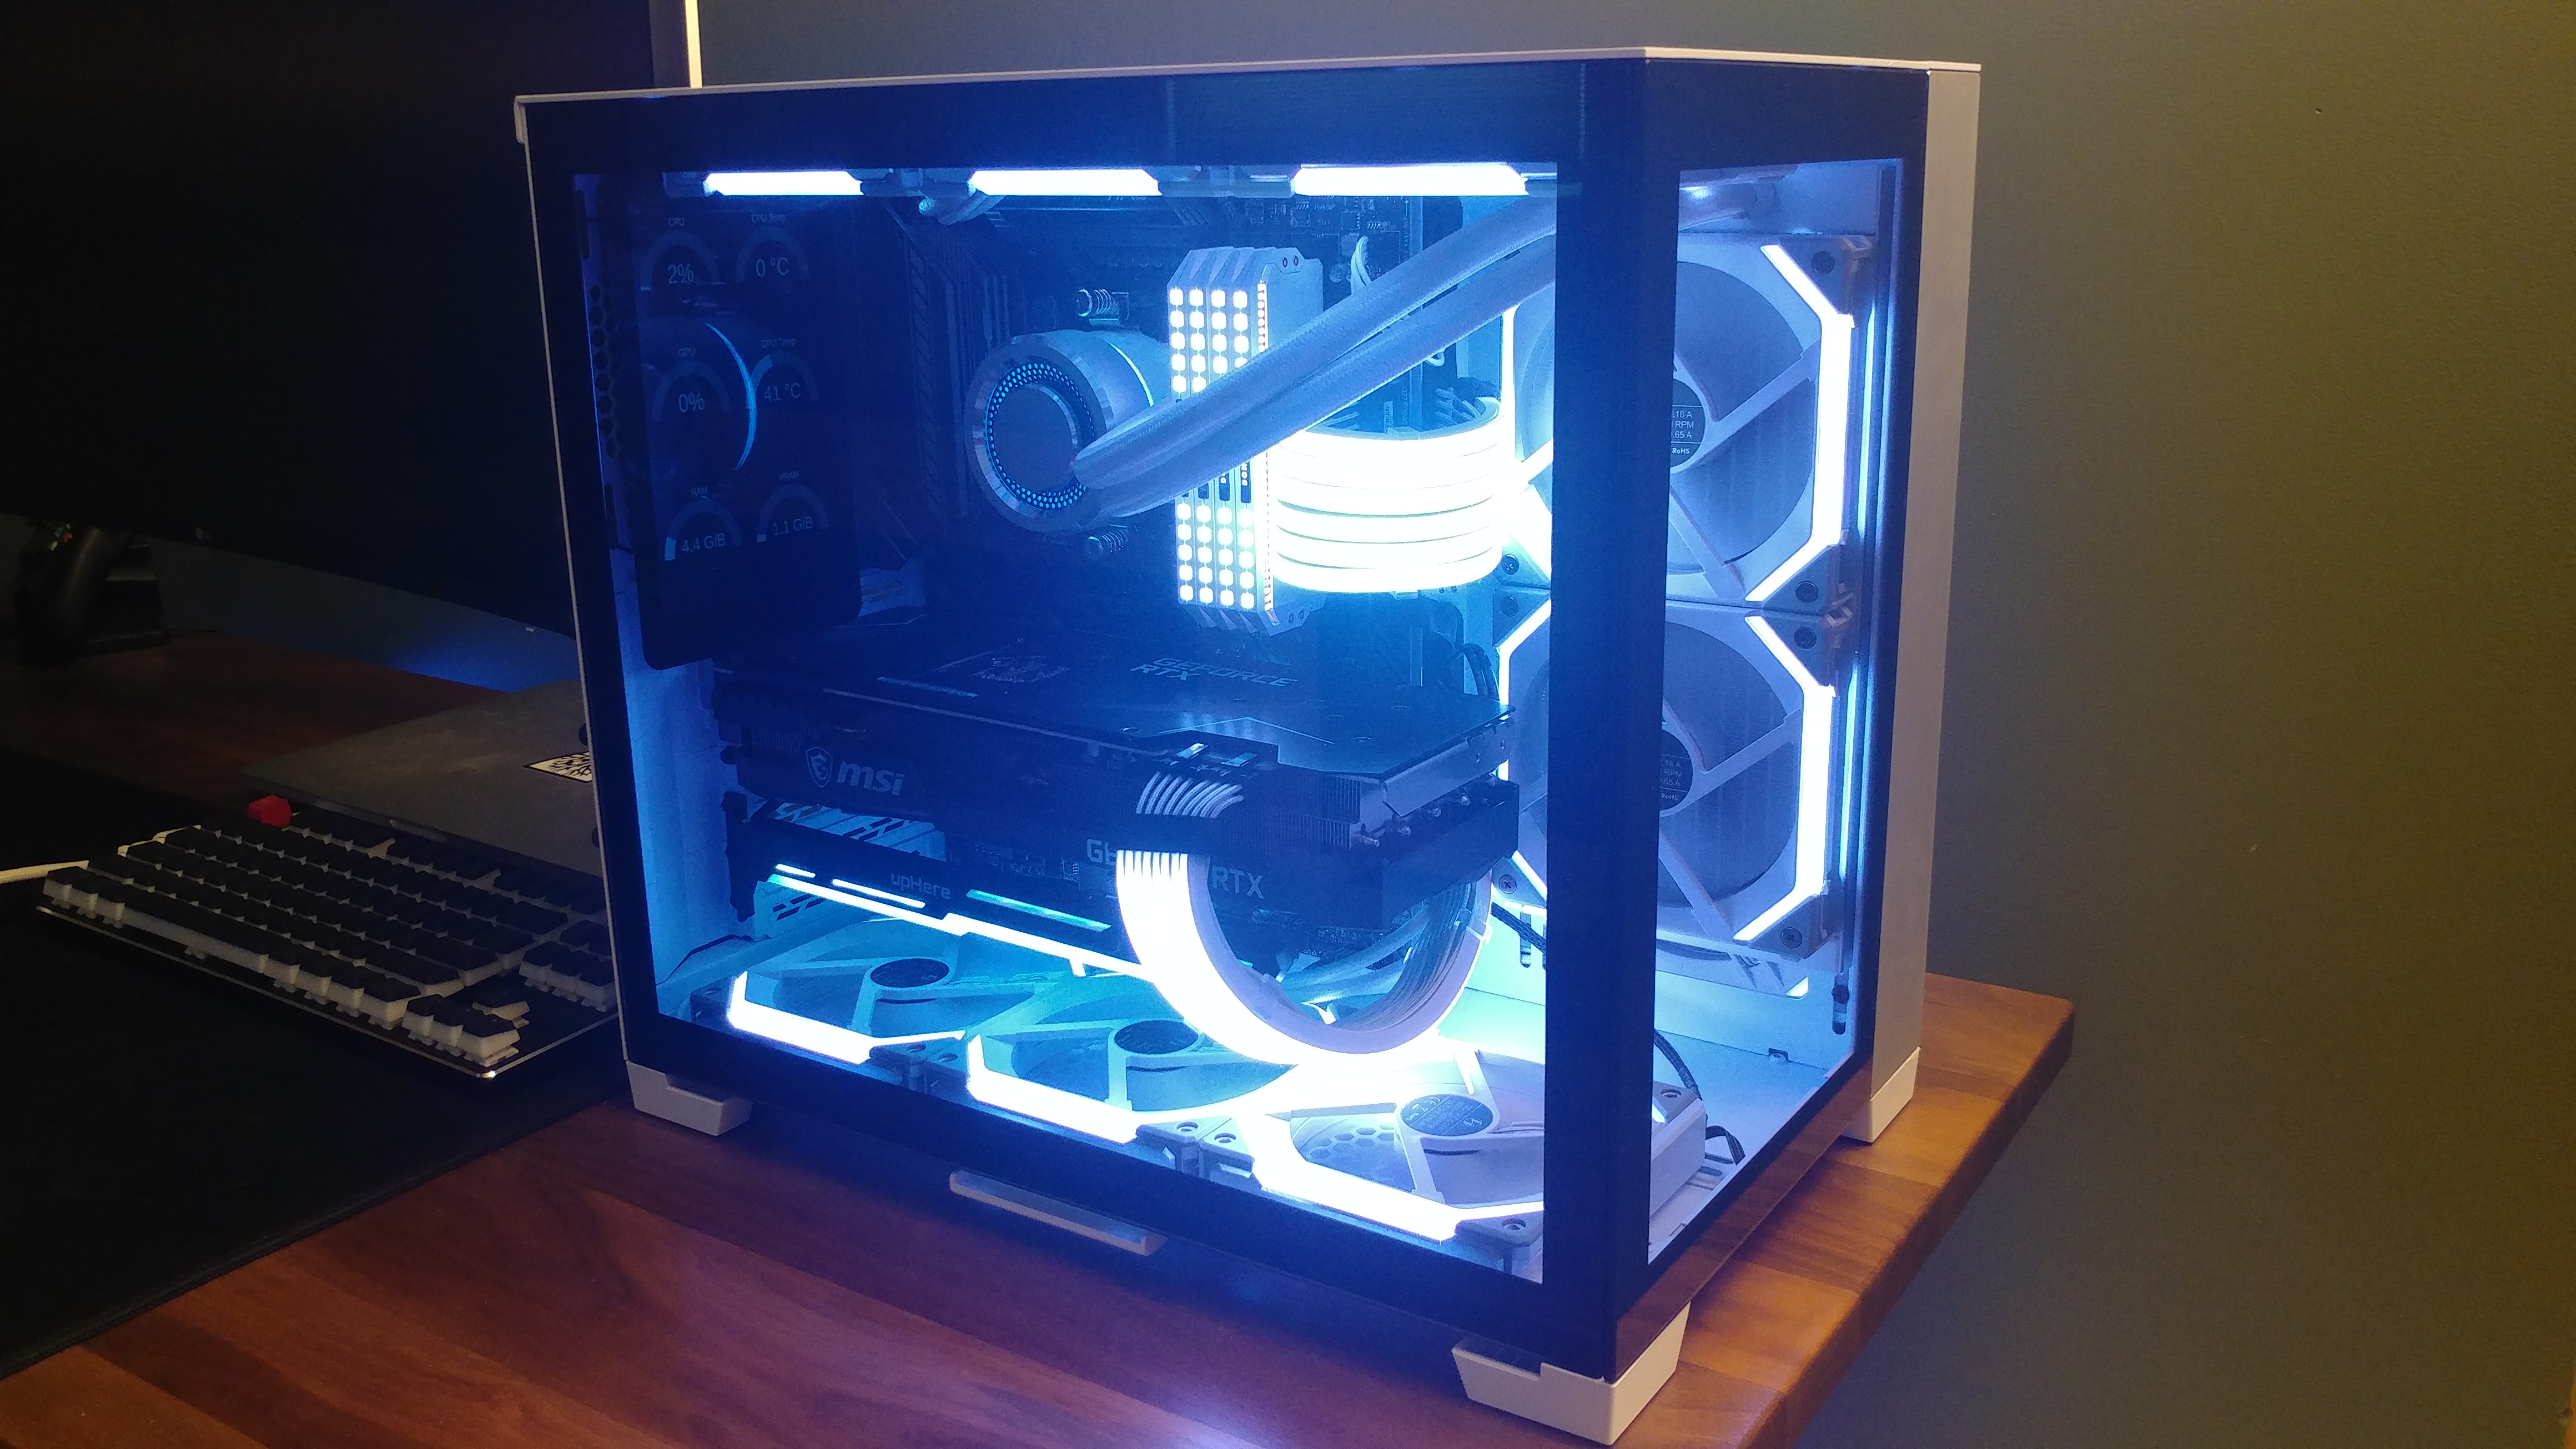 The completed build in all its RGB glory